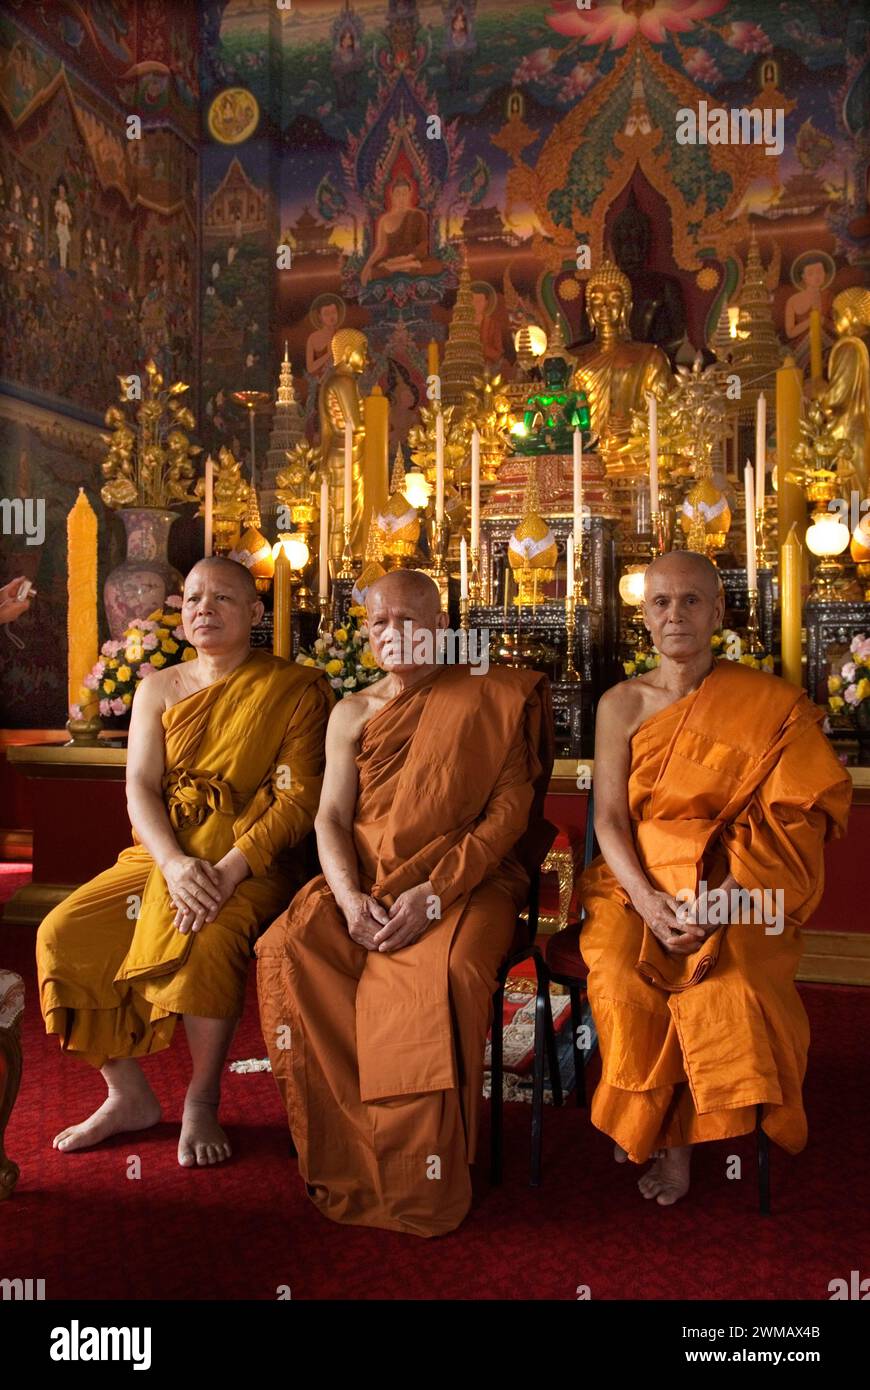 Buddhist monks temple interior UK. Thai monks in saffron robes in  Buddhapadipa Temple in Wimbledon annual celebration of the building of this Thai temple. London SW19 England 24th June 2006. HOMER SYKES Stock Photo